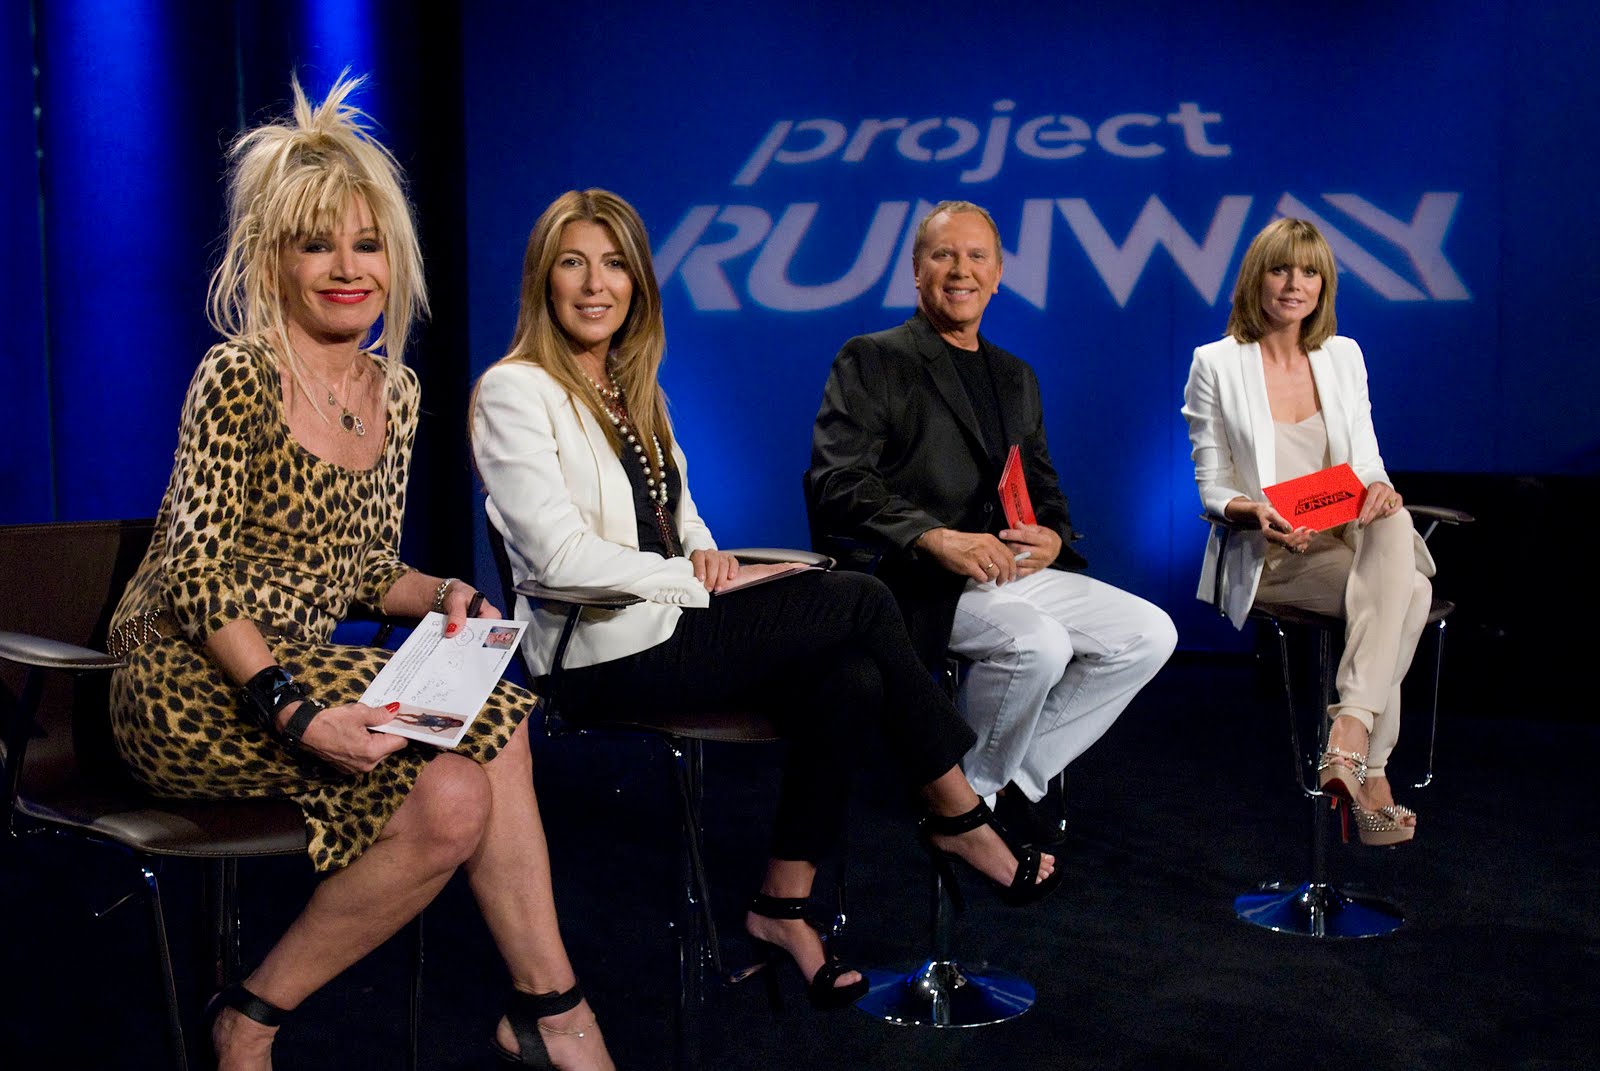 Styl'd by Choice: Project Runway Recap (episode 3)